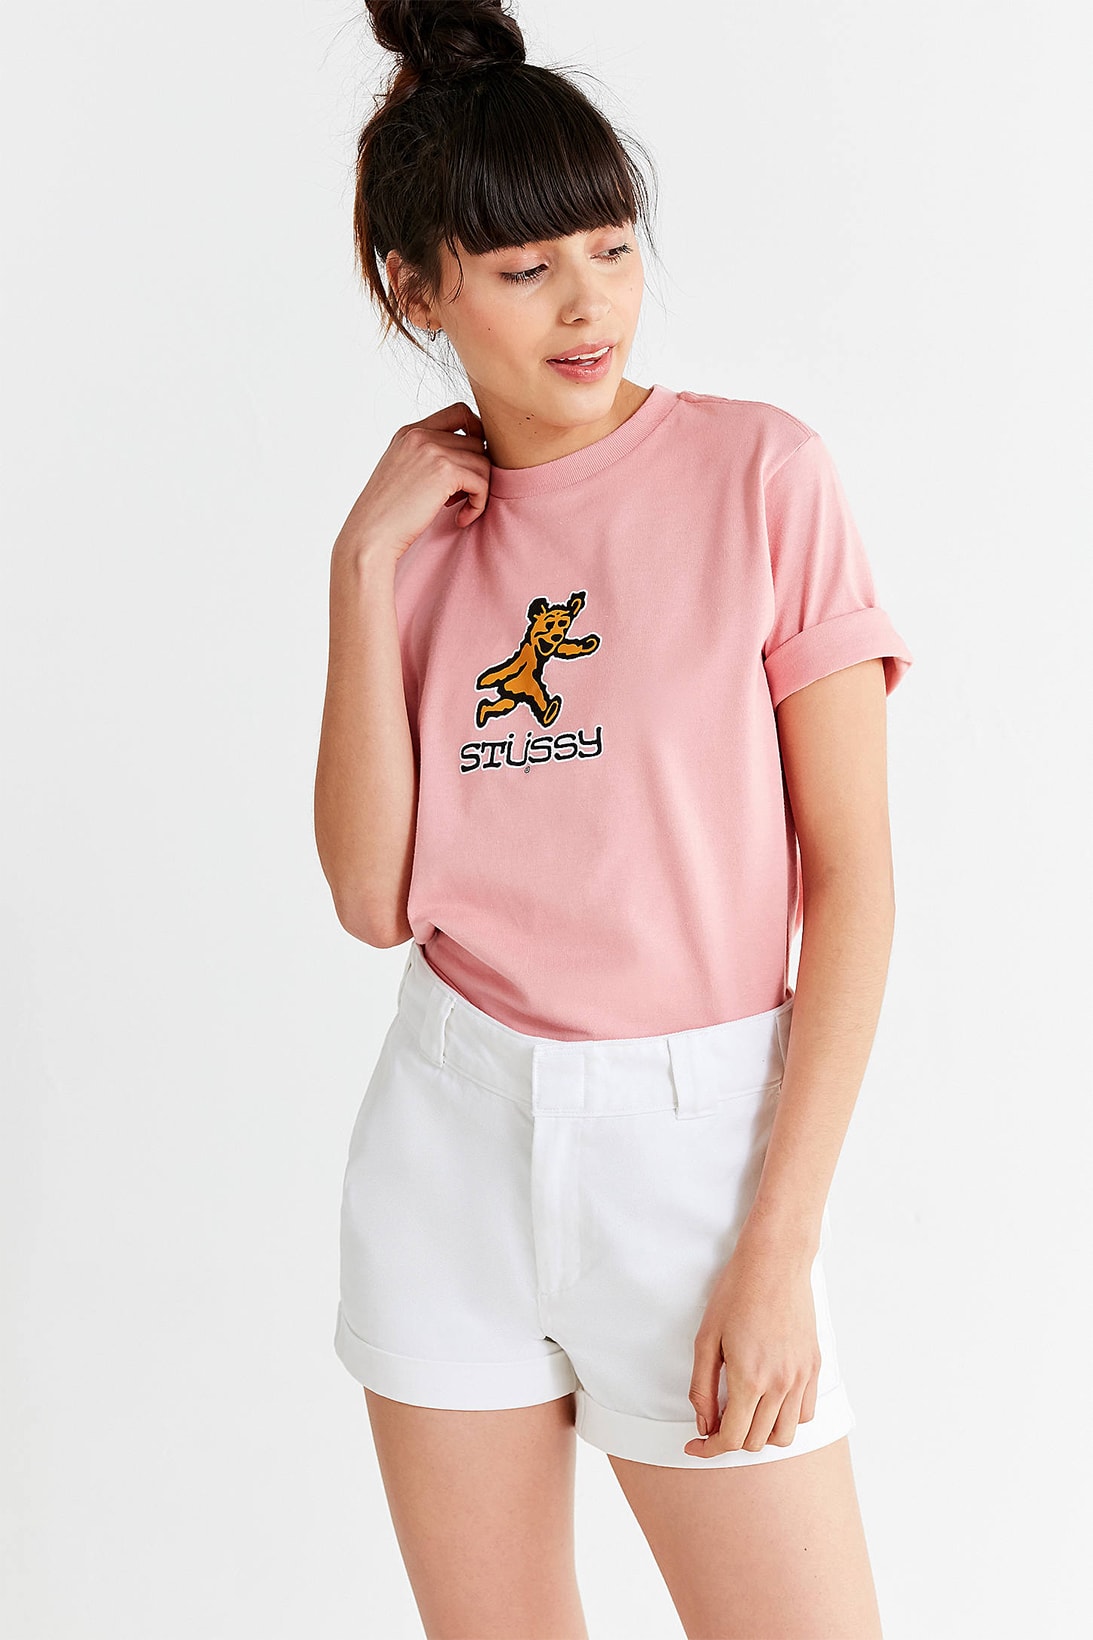 Stussy Pastel Pink Bear Logo T-Shirt Millennial Graphic Women's Ladies Girls Exclusive Where to Buy Urban Outfitters